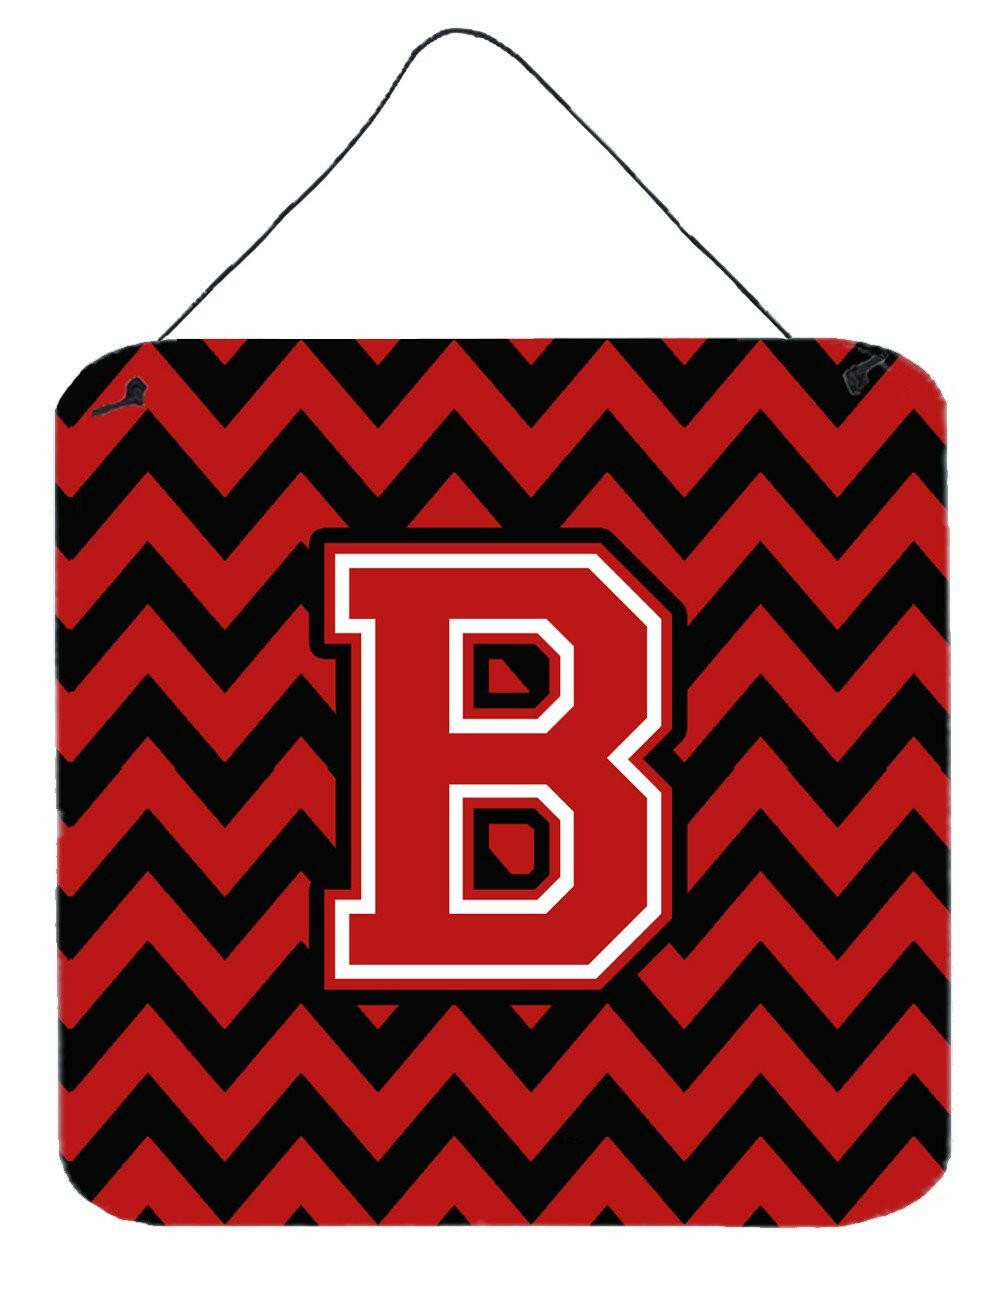 Letter B Chevron Black and Red   Wall or Door Hanging Prints CJ1047-BDS66 by Caroline's Treasures